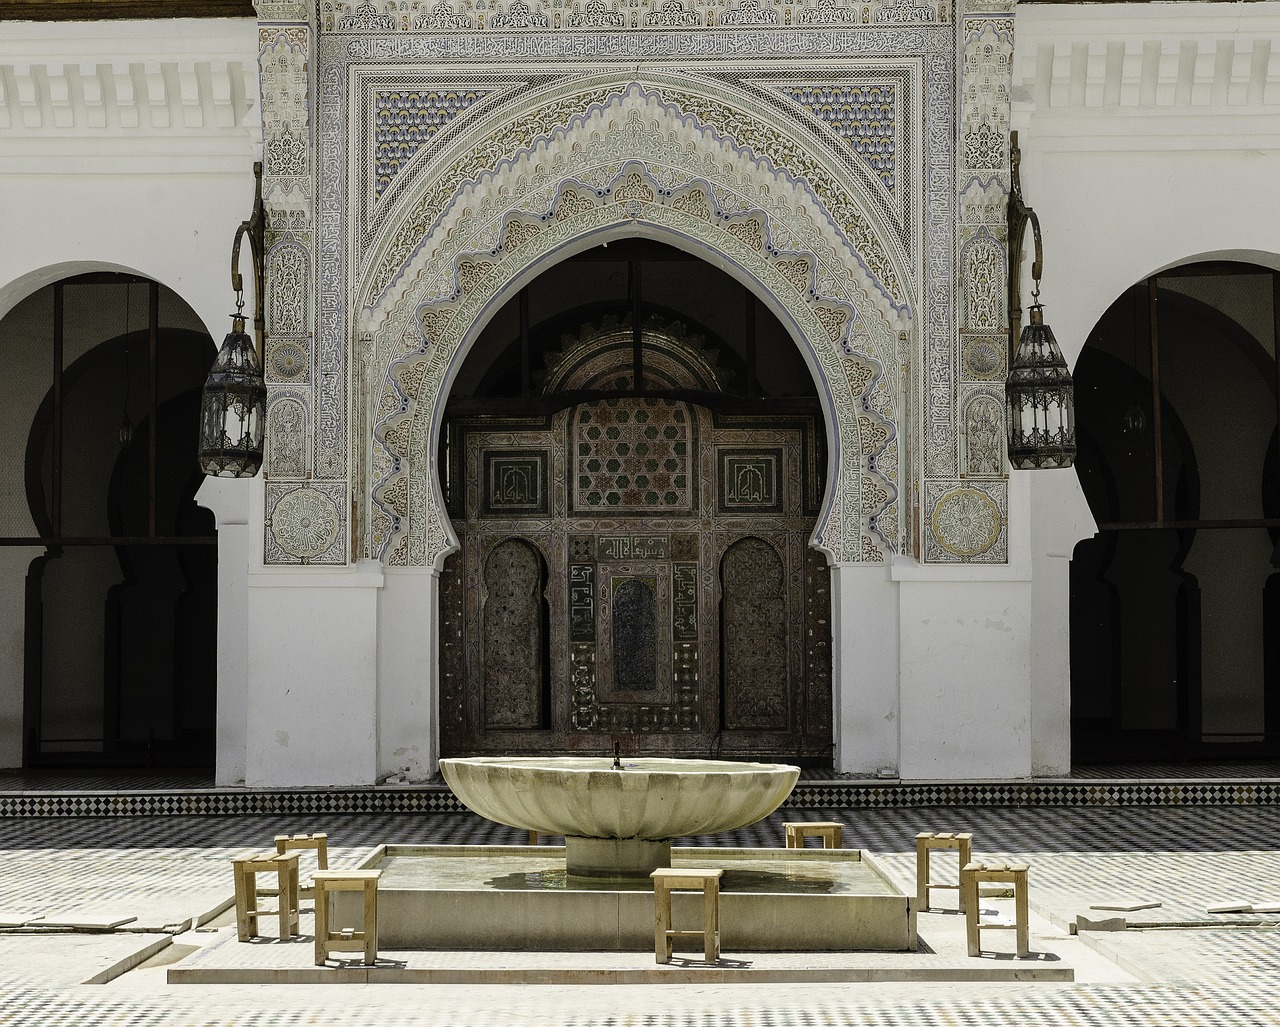 4-Day Adventure in Fez, Morocco